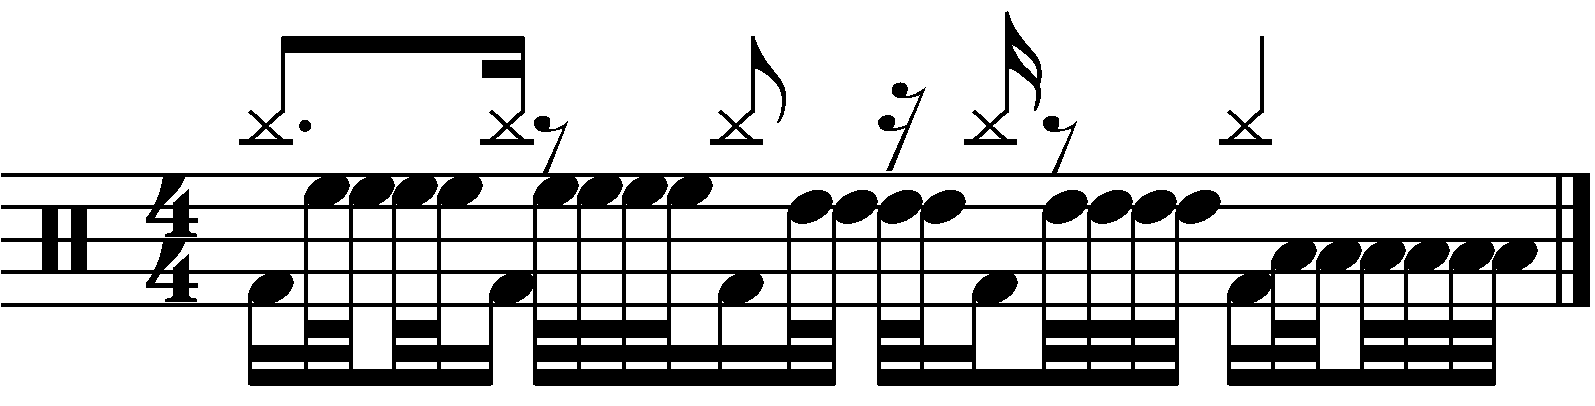 Syncopated 16th note 33334 fills